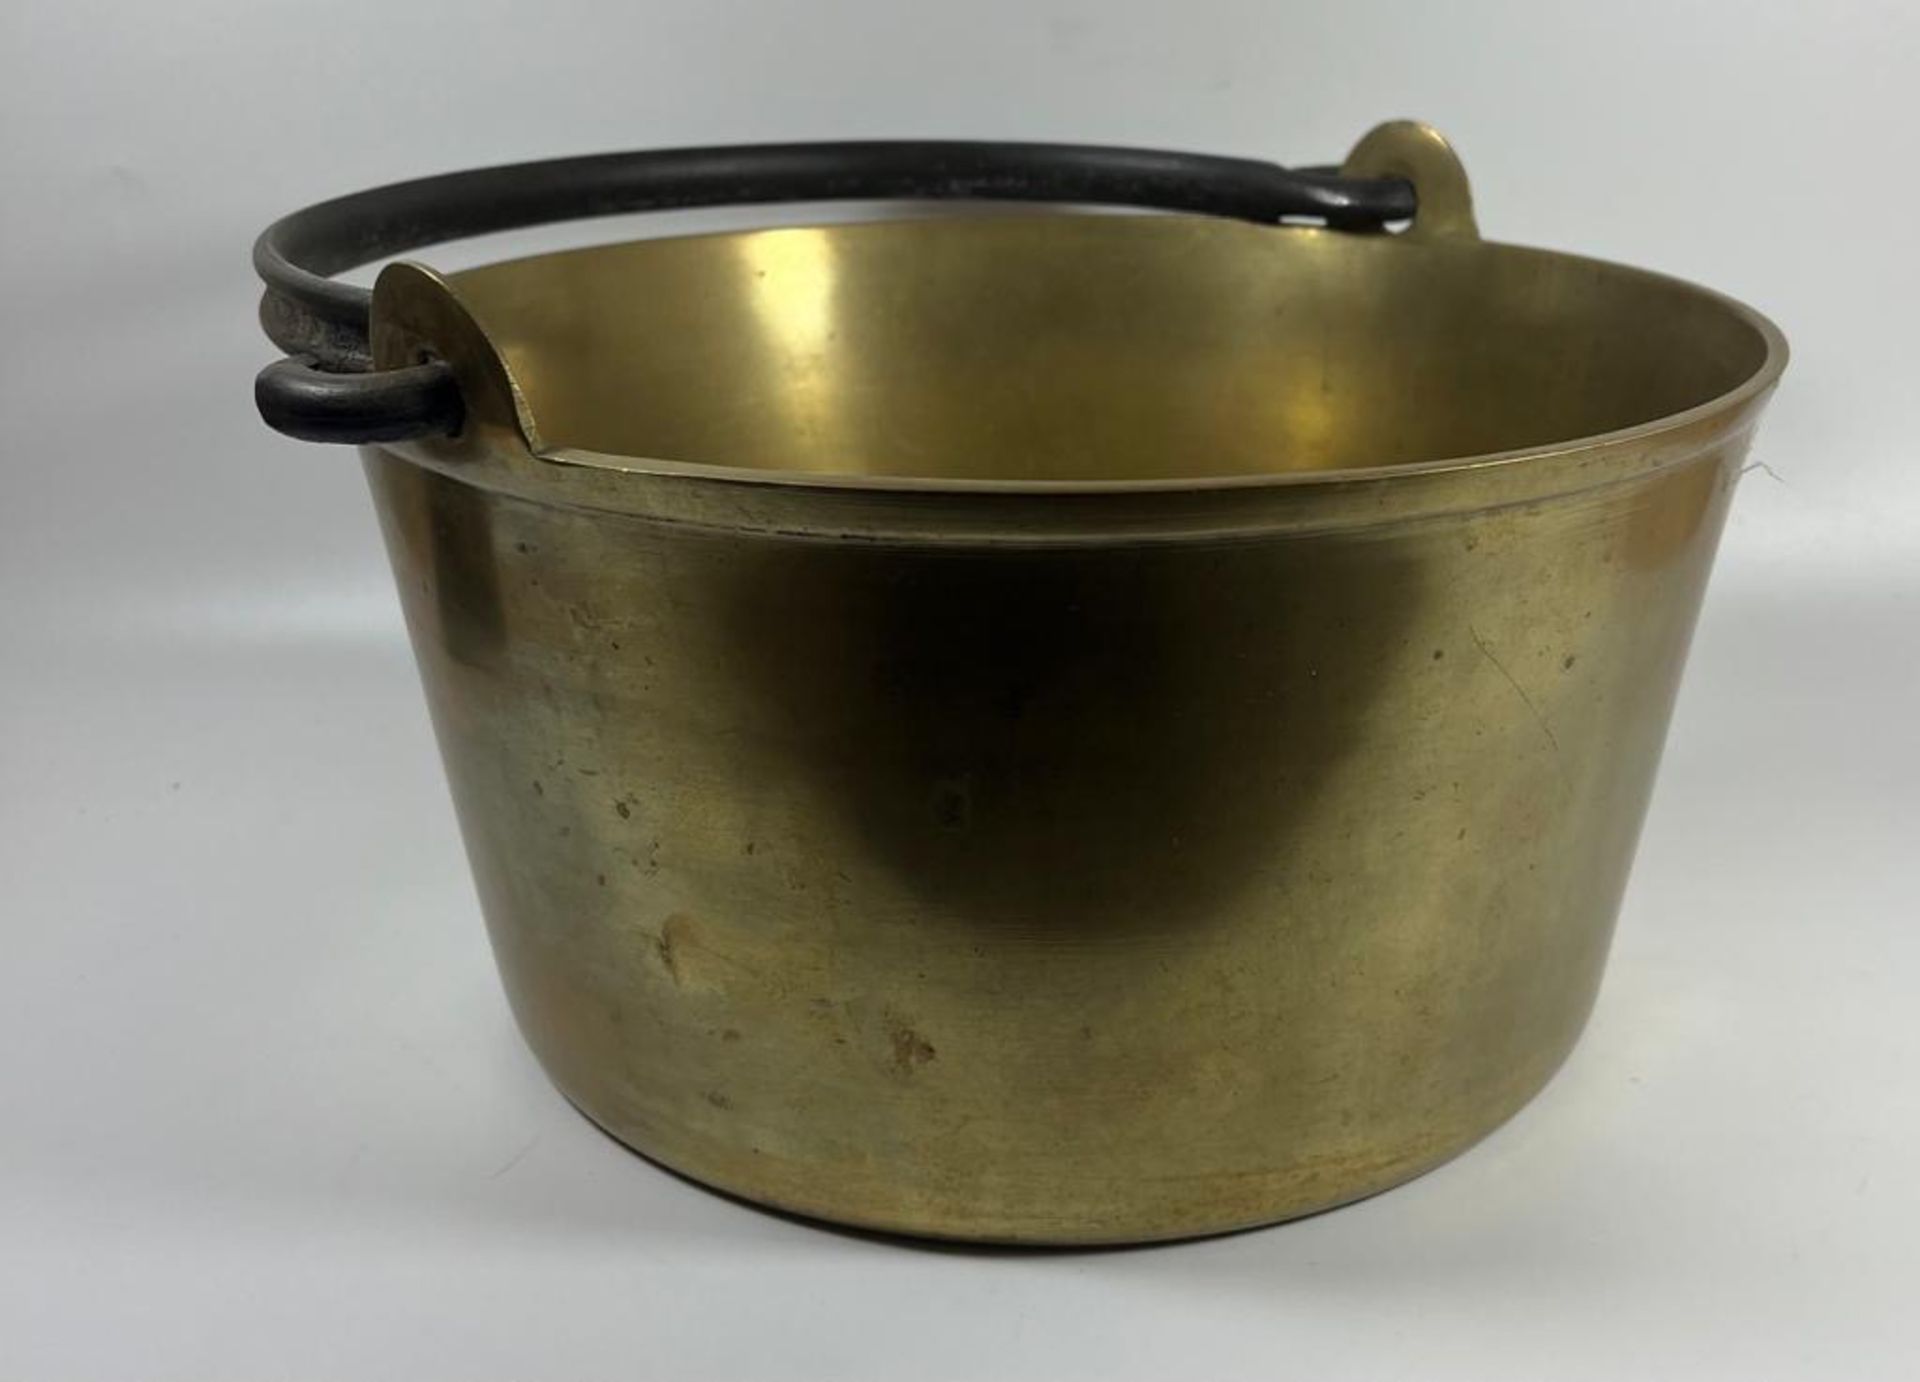 A HEAVY EARLY 20TH CENTURY BRASS JAM PAN / COOKING POT WITH CAST IRON HANDLE - Image 2 of 3